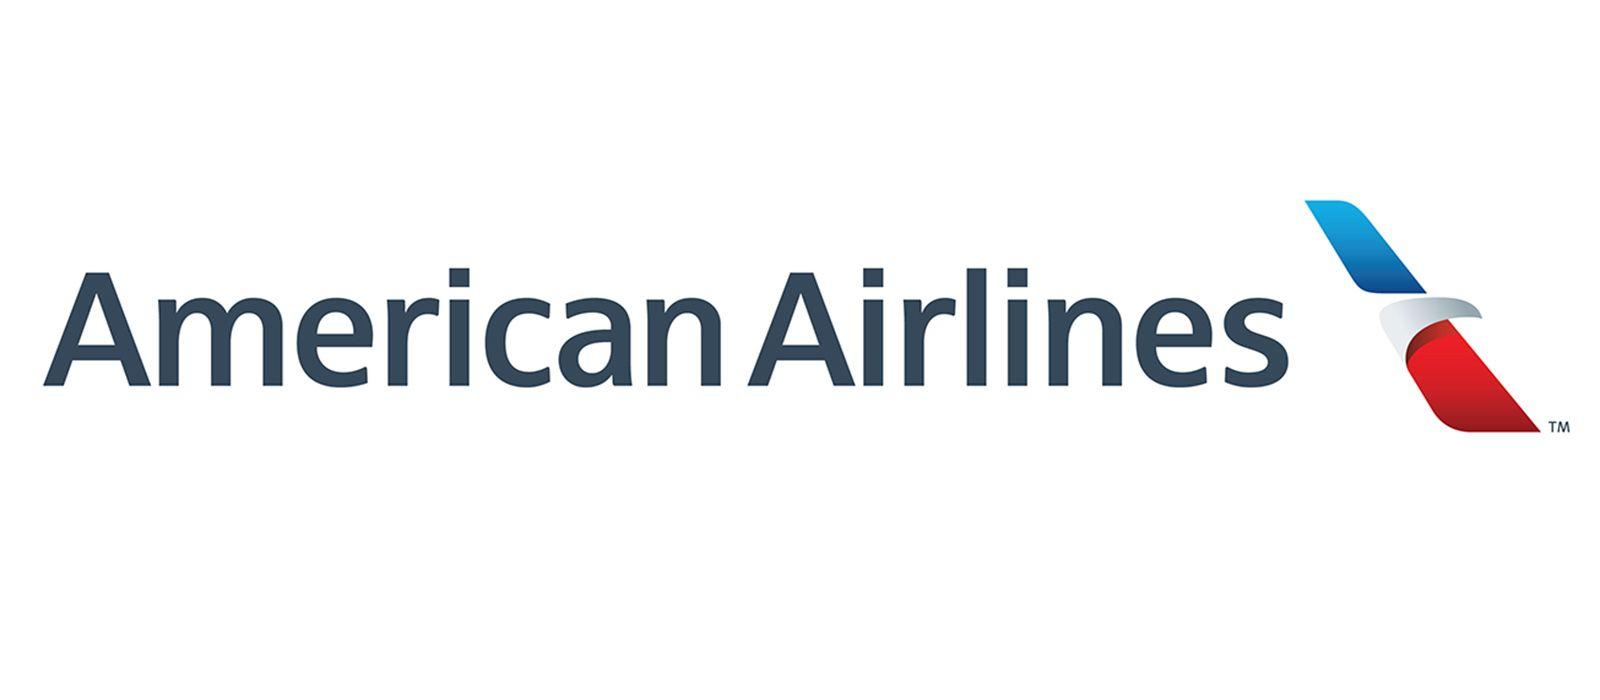 New AA Logo - American Airlines debuts new, modern look. | Corporate Identity Portal